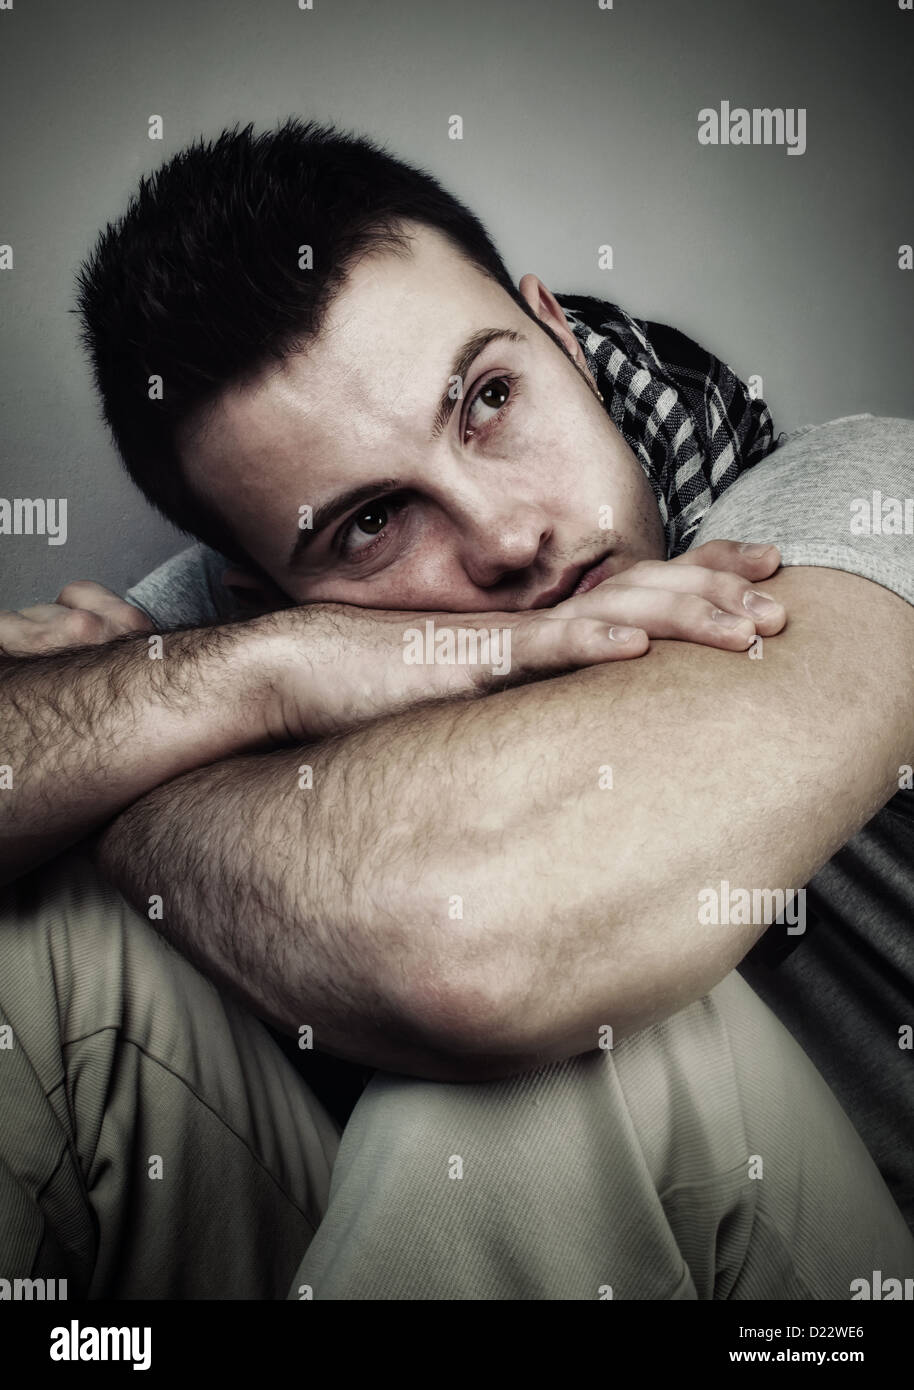 Young man who is lonely and desolate-High contrast image Stock Photo